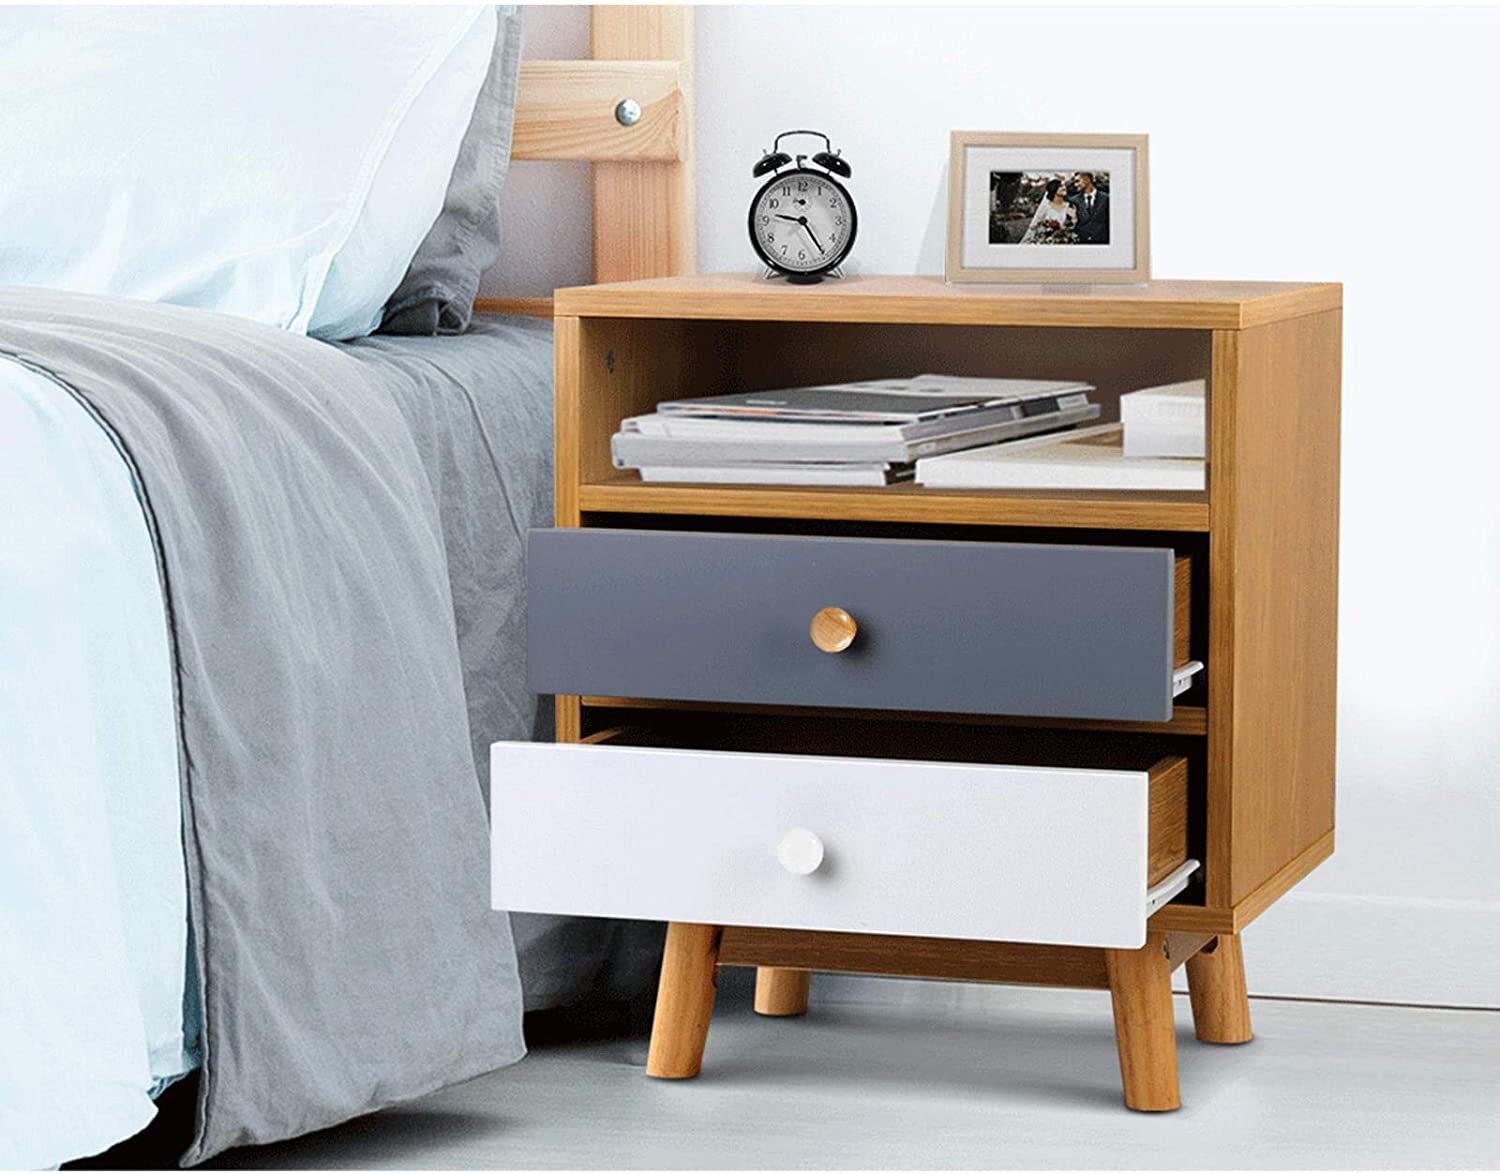 30 Awesome Bedside Table Ideas and Designs — RenoGuide ...